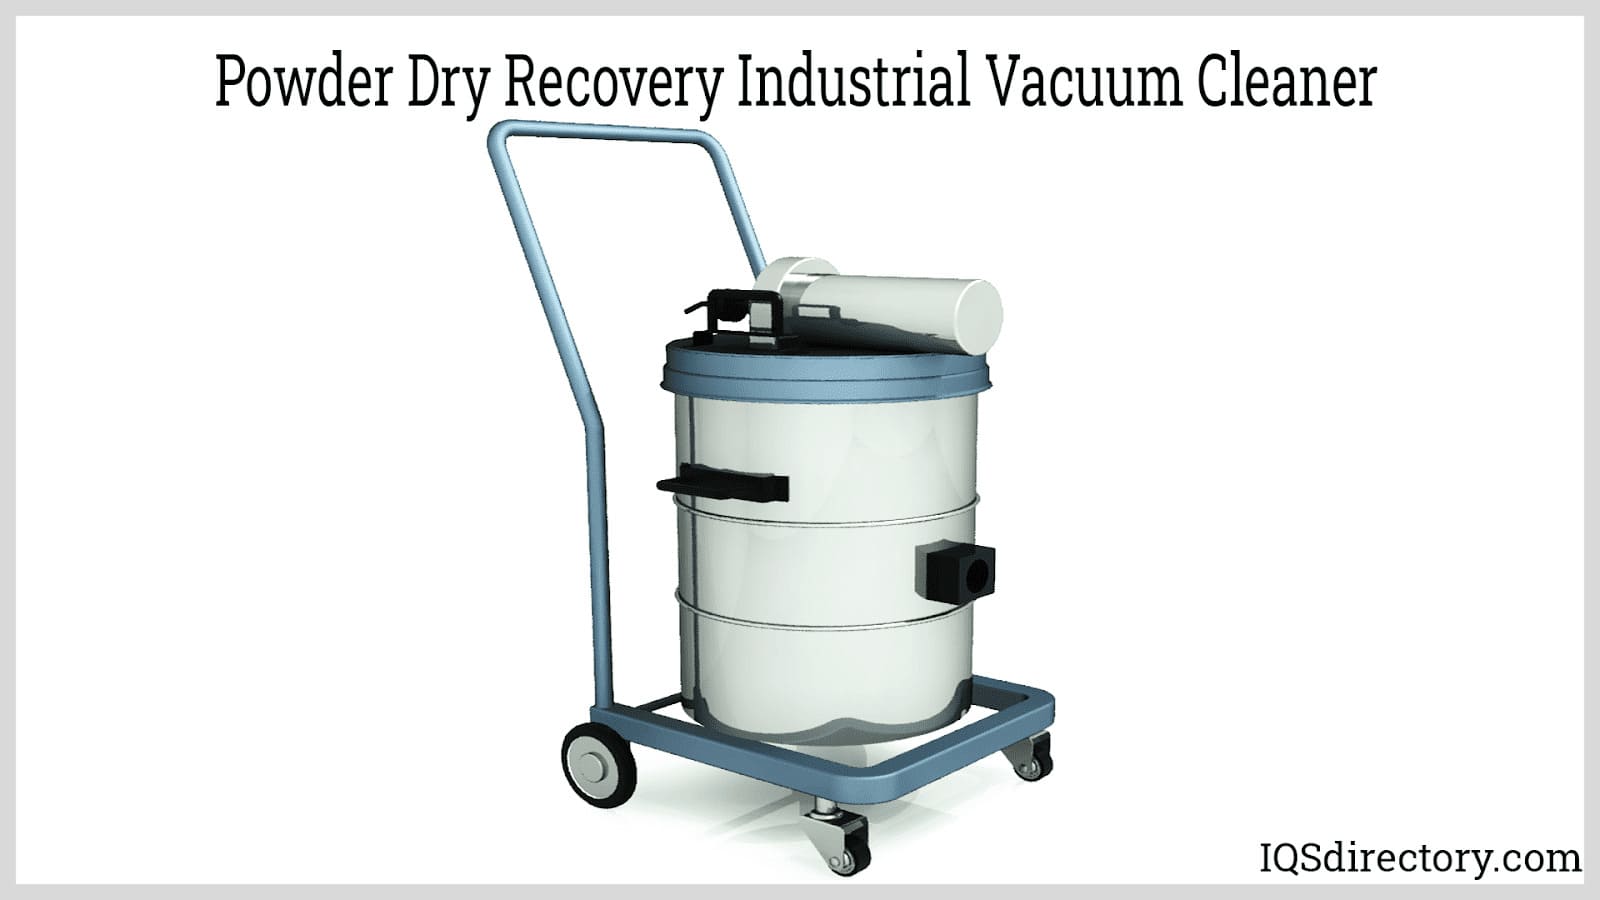 Powder Dry Recovery Industrial Vacuum Cleaner